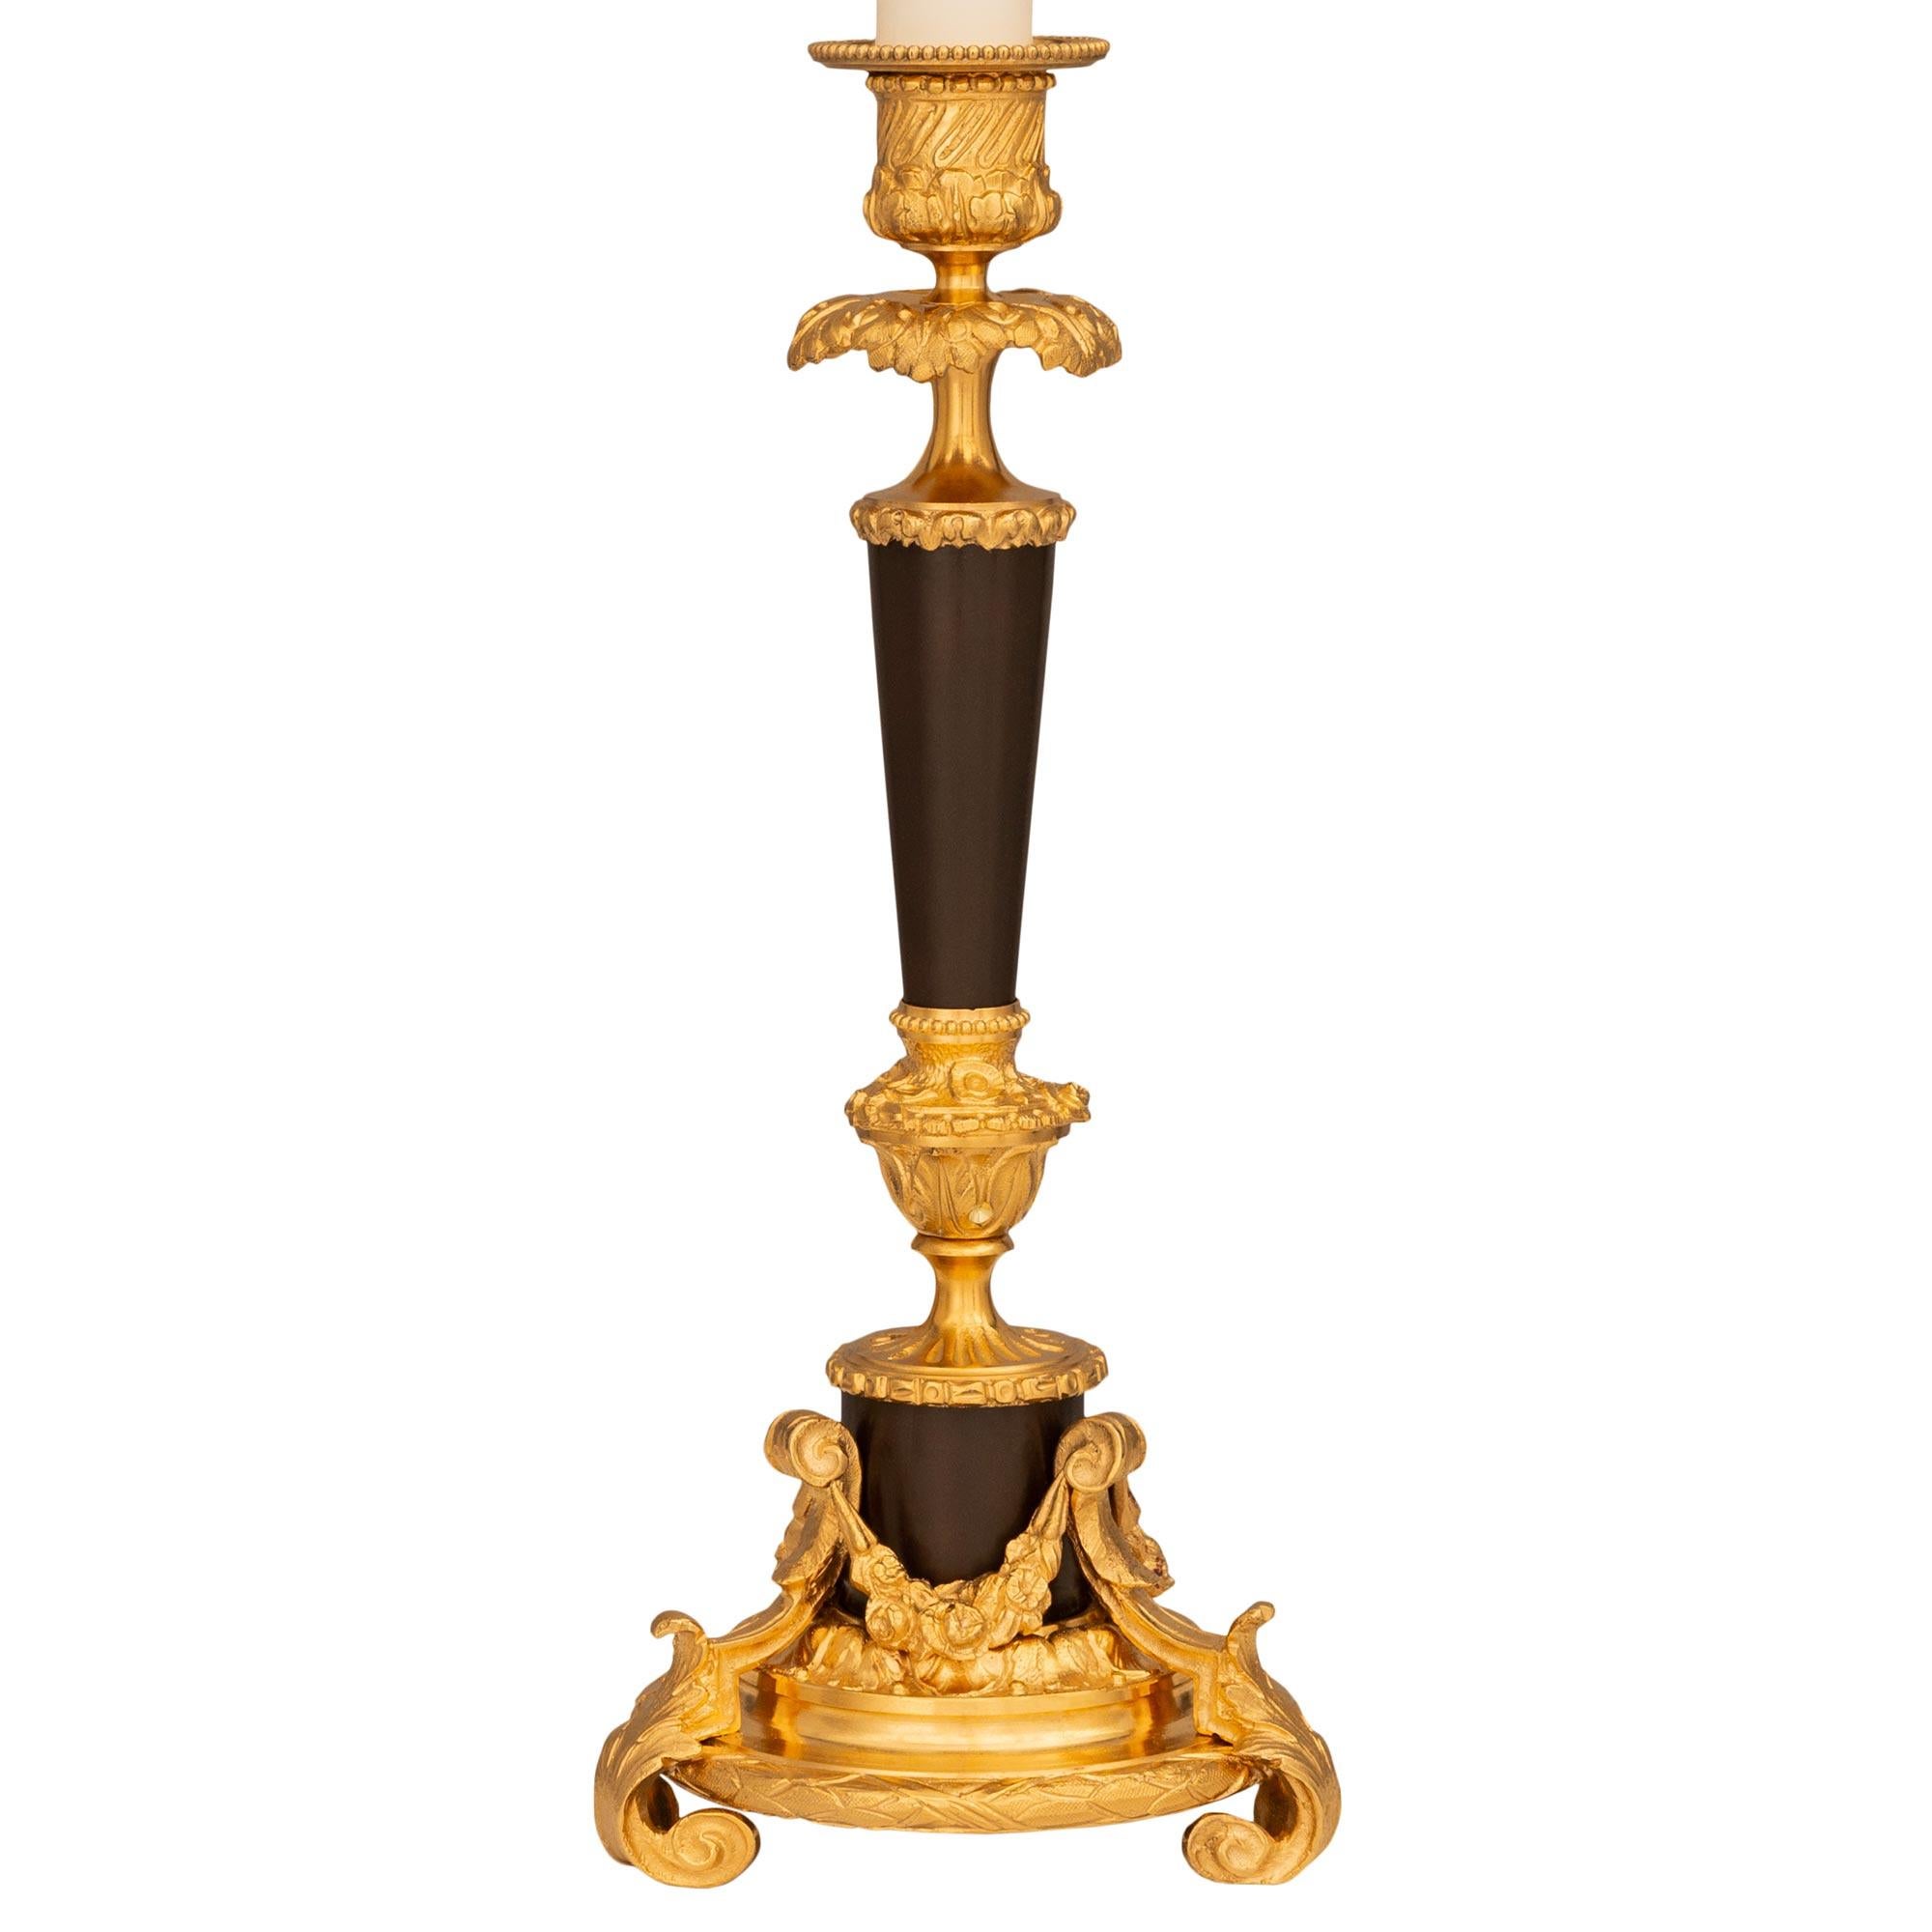 A striking and most elegant pair of French 19th century Louis XVI st. Ormolu and patinated Bronze candlestick lamps. Each lamp is raised on a remarkable circular Ormolu base with three scrolled acanthus leaf feet connected by a laurel band at the